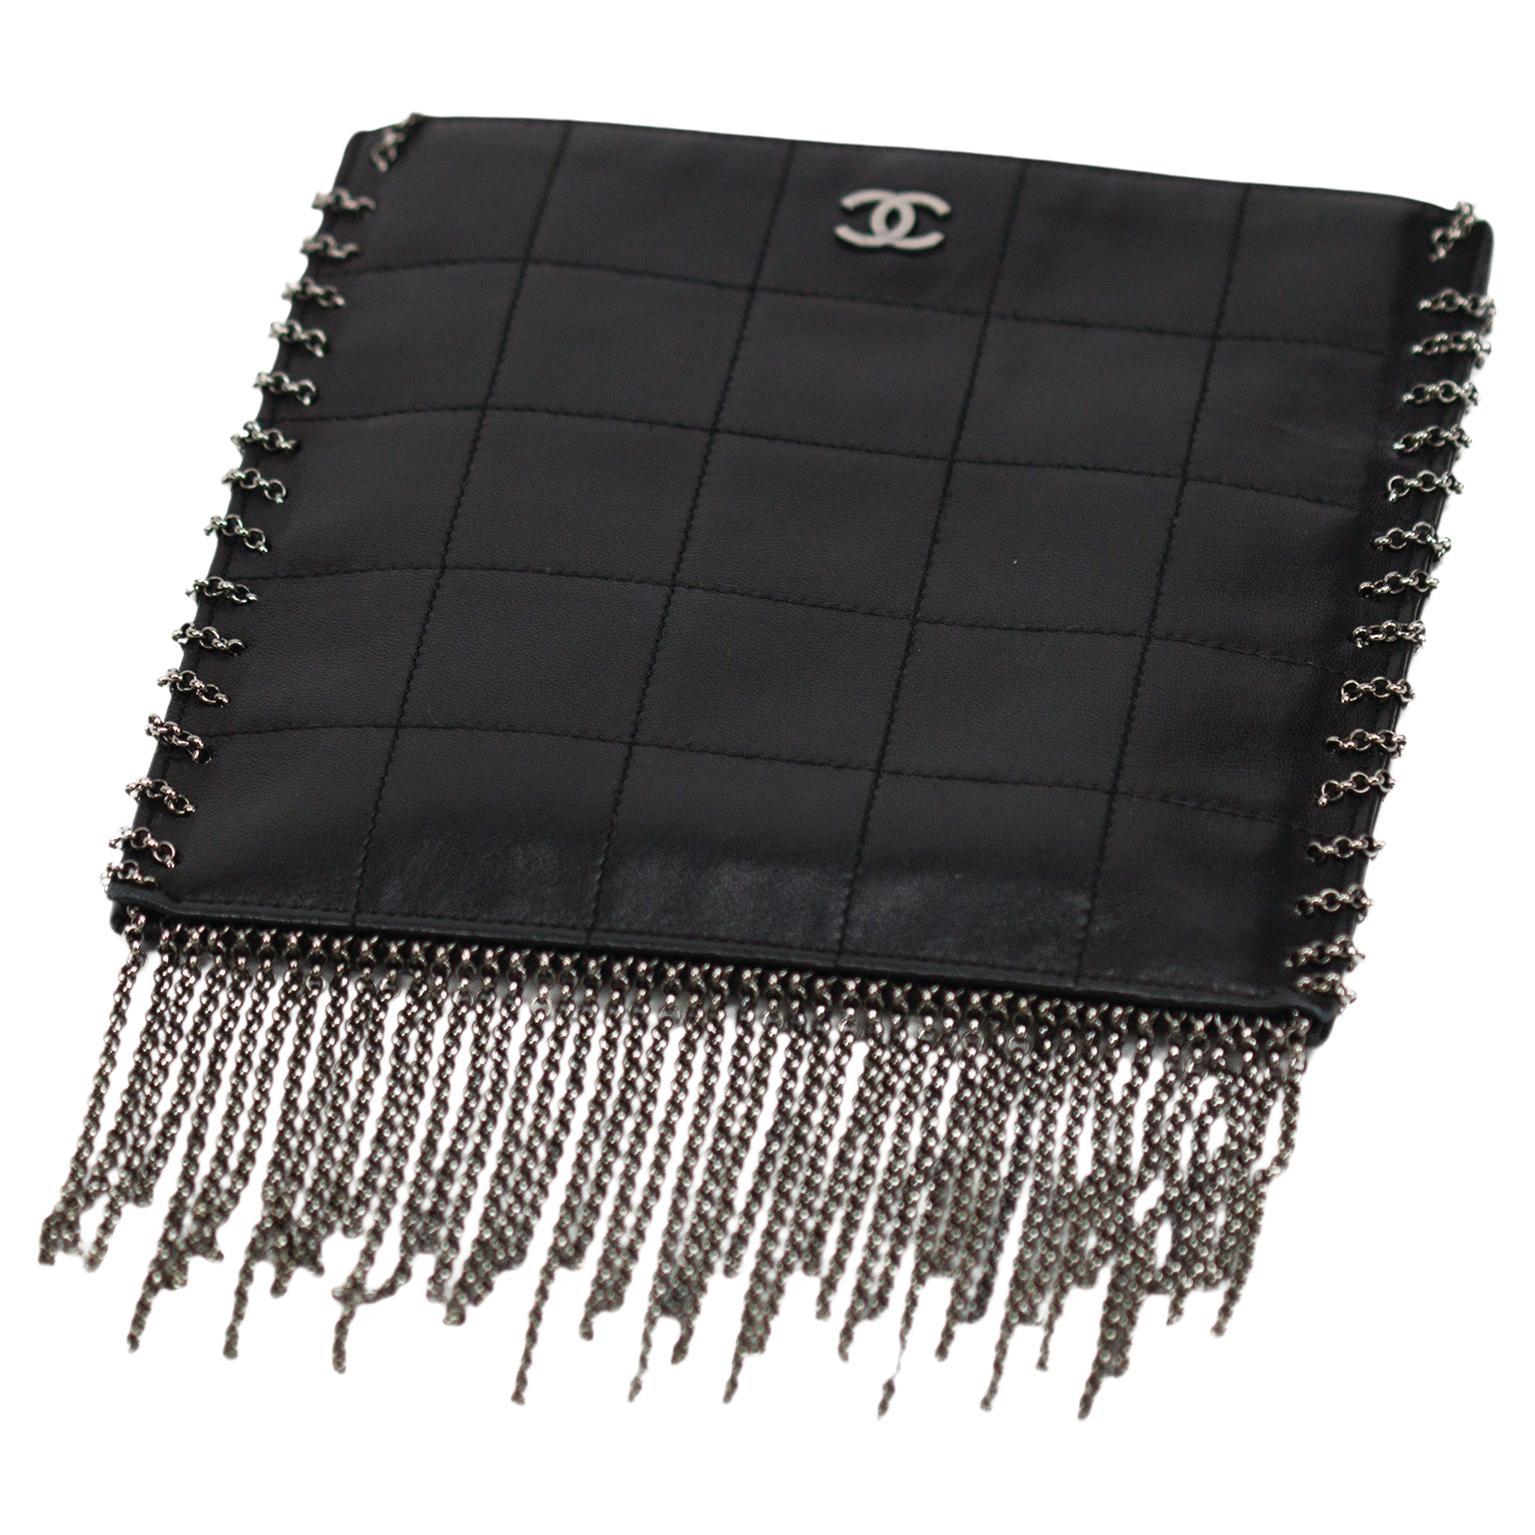 Chanel 2002 Vintage Edgy Punk Fringe Chain Quilted Mini Tote Crossbody Bag In Good Condition For Sale In Miami, FL